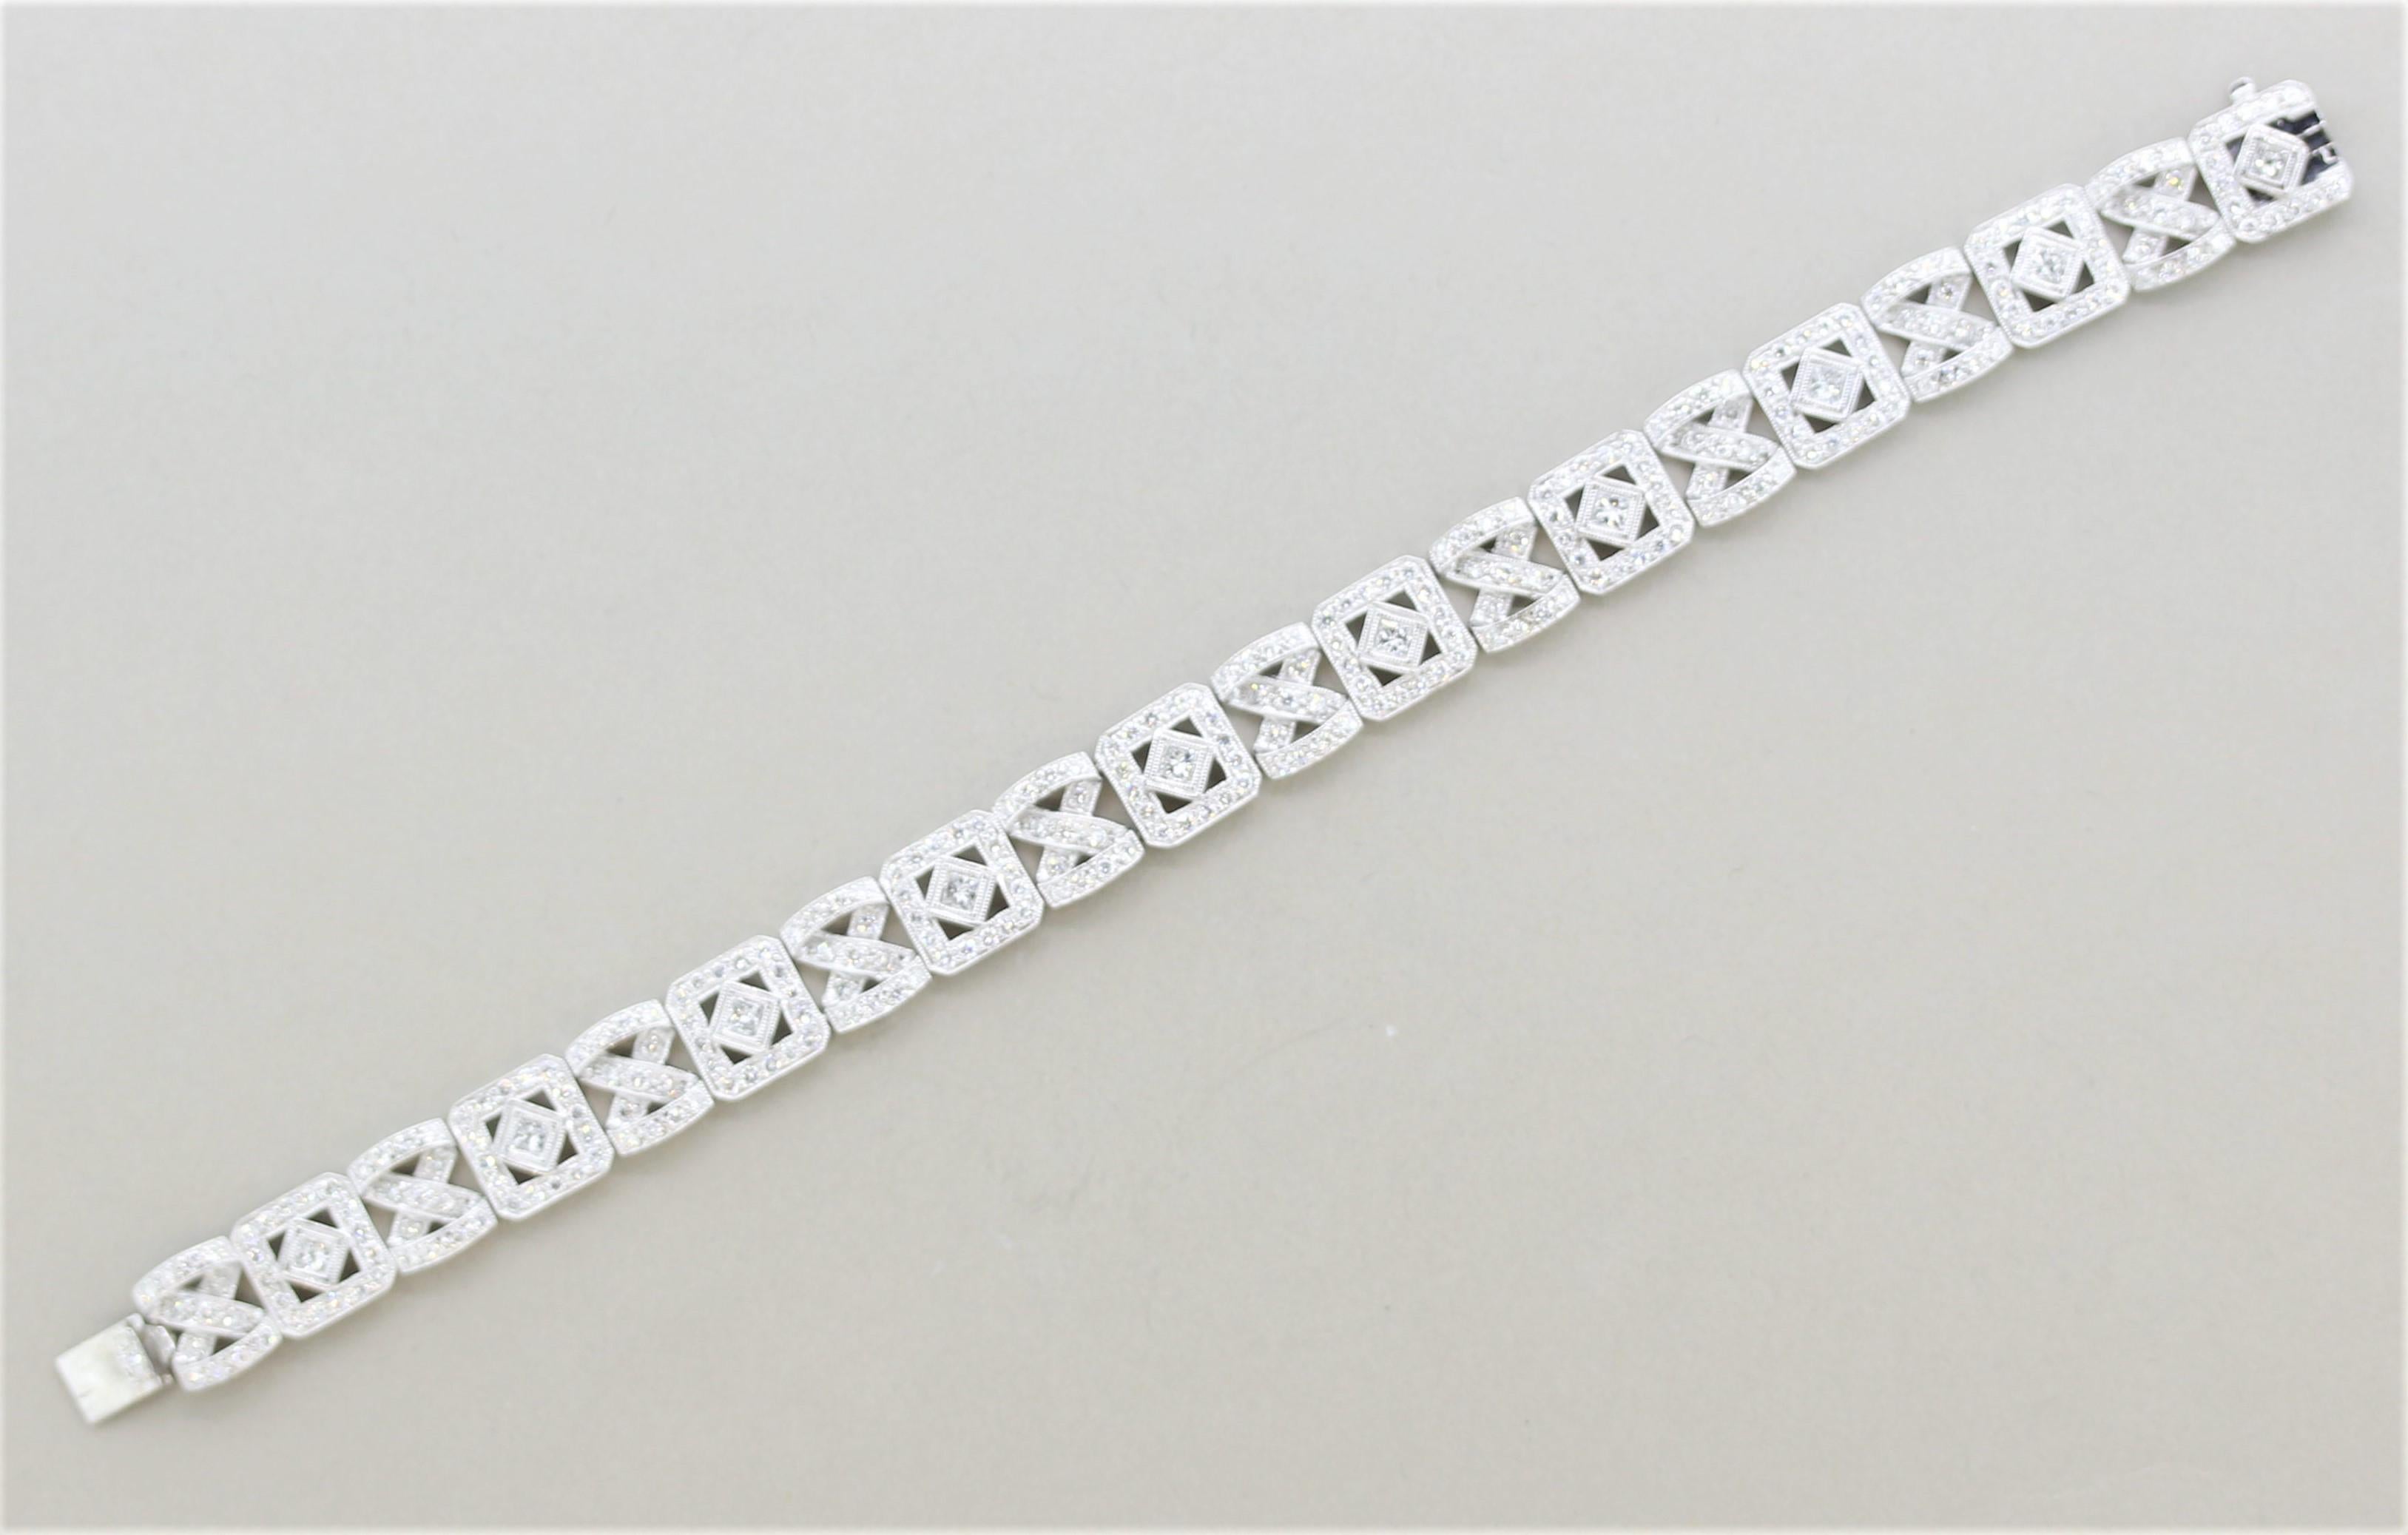 A unique link bracelet featuring 376 carats of round brilliant and princess-cut diamonds. The round-cut diamonds are set around the 18k gold links while the larger princess-cut diamonds are set in the center of every-other link. Made in 18k white